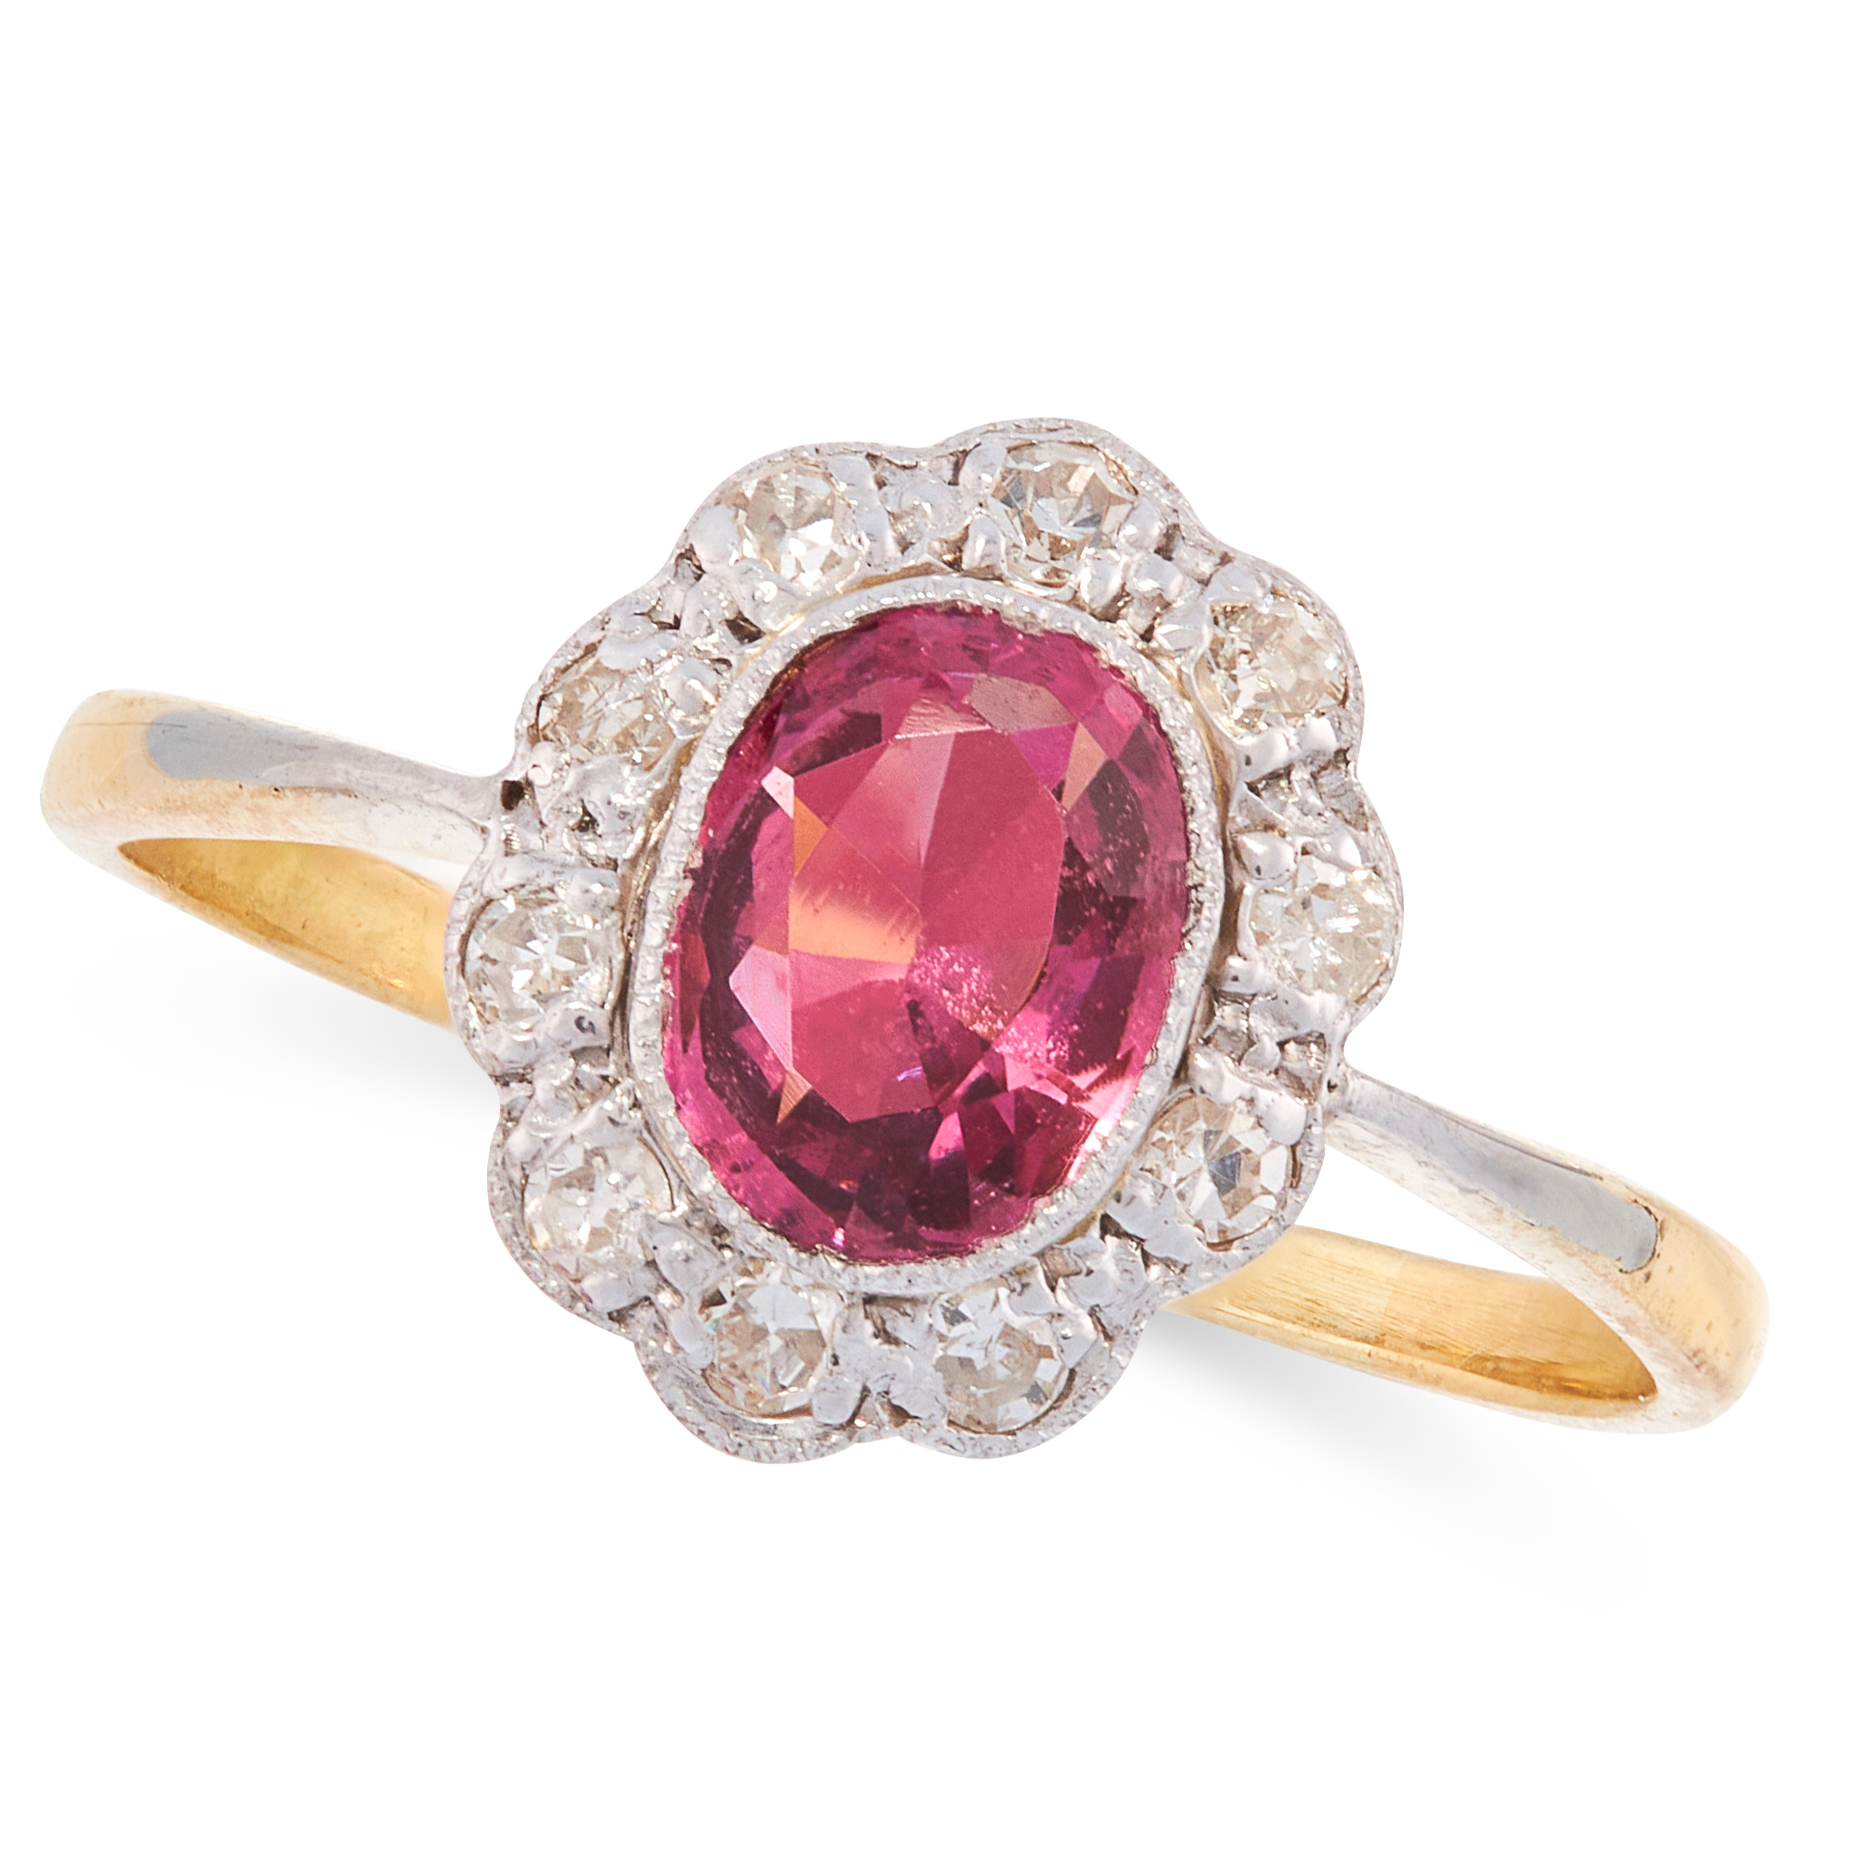 A SPINEL AND DIAMOND DRESS RING, EARLY 20TH CENTURY in high carat yellow gold, set with an oval